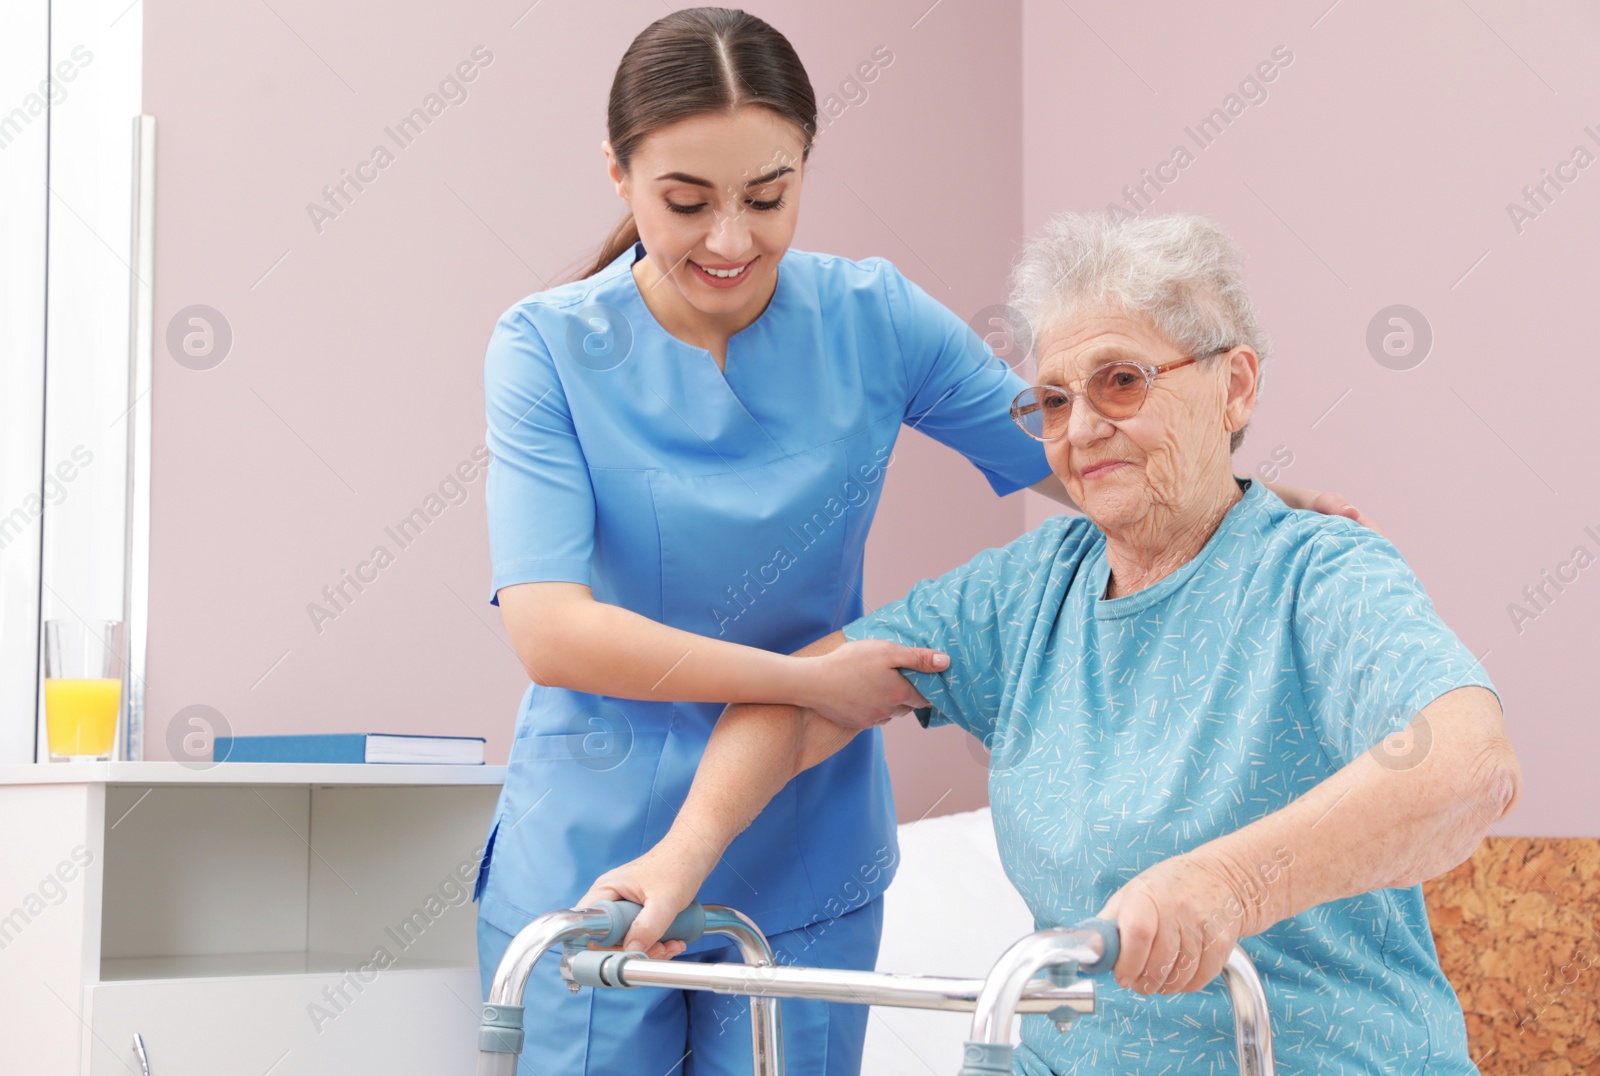 Photo of Nurse assisting senior woman with walker in hospital ward